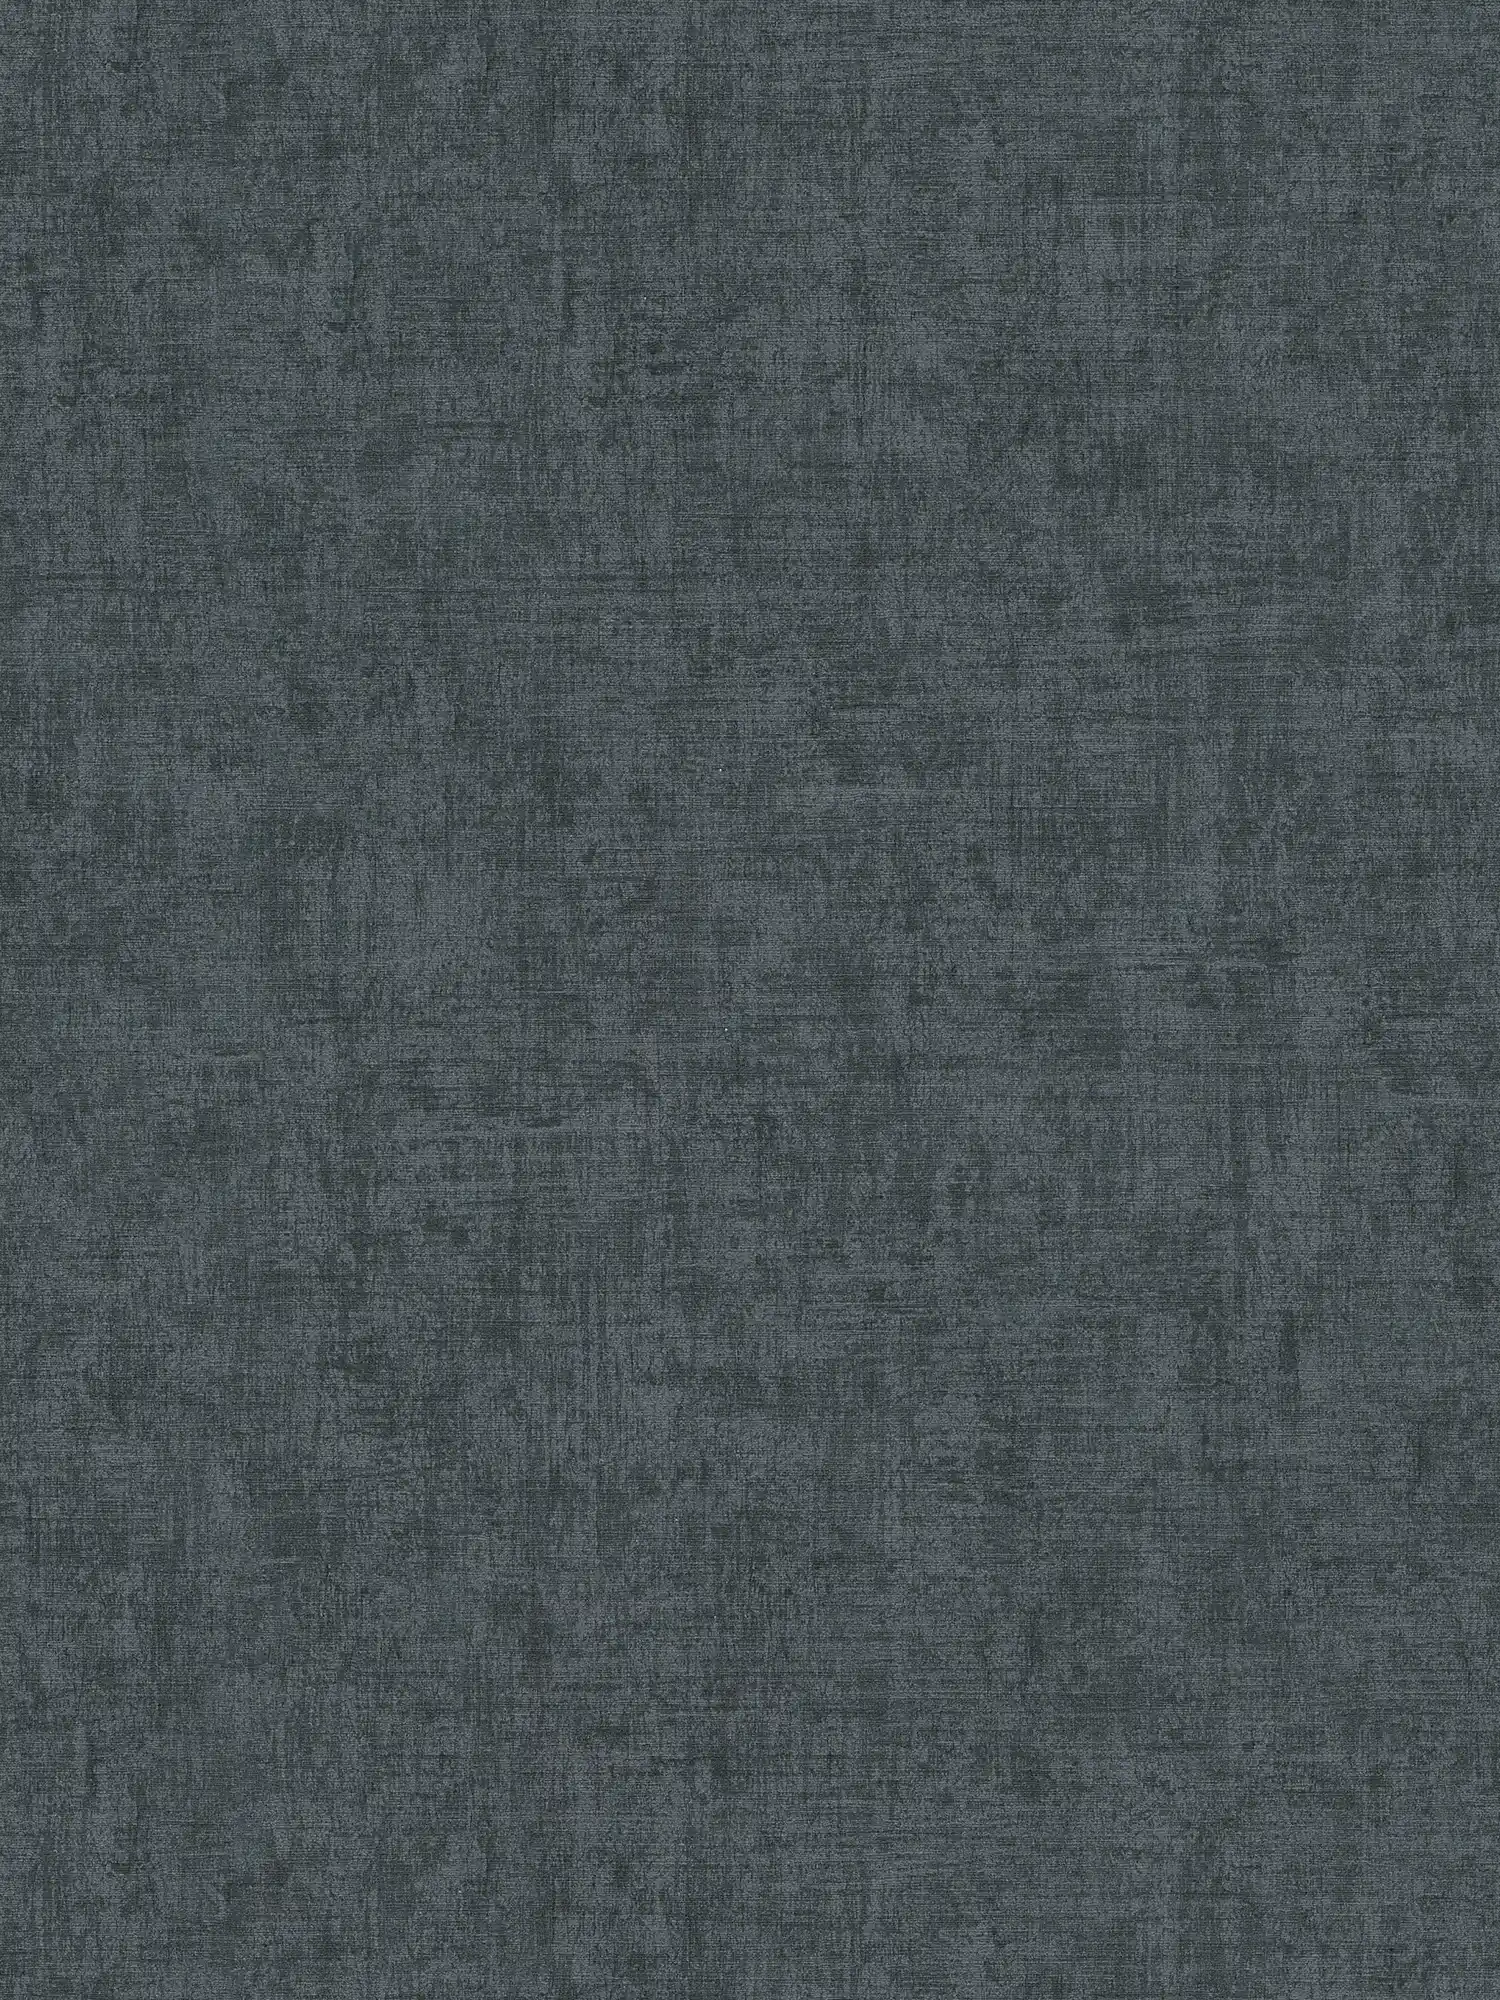 Dark wallpaper with colour and texture pattern - grey, black
